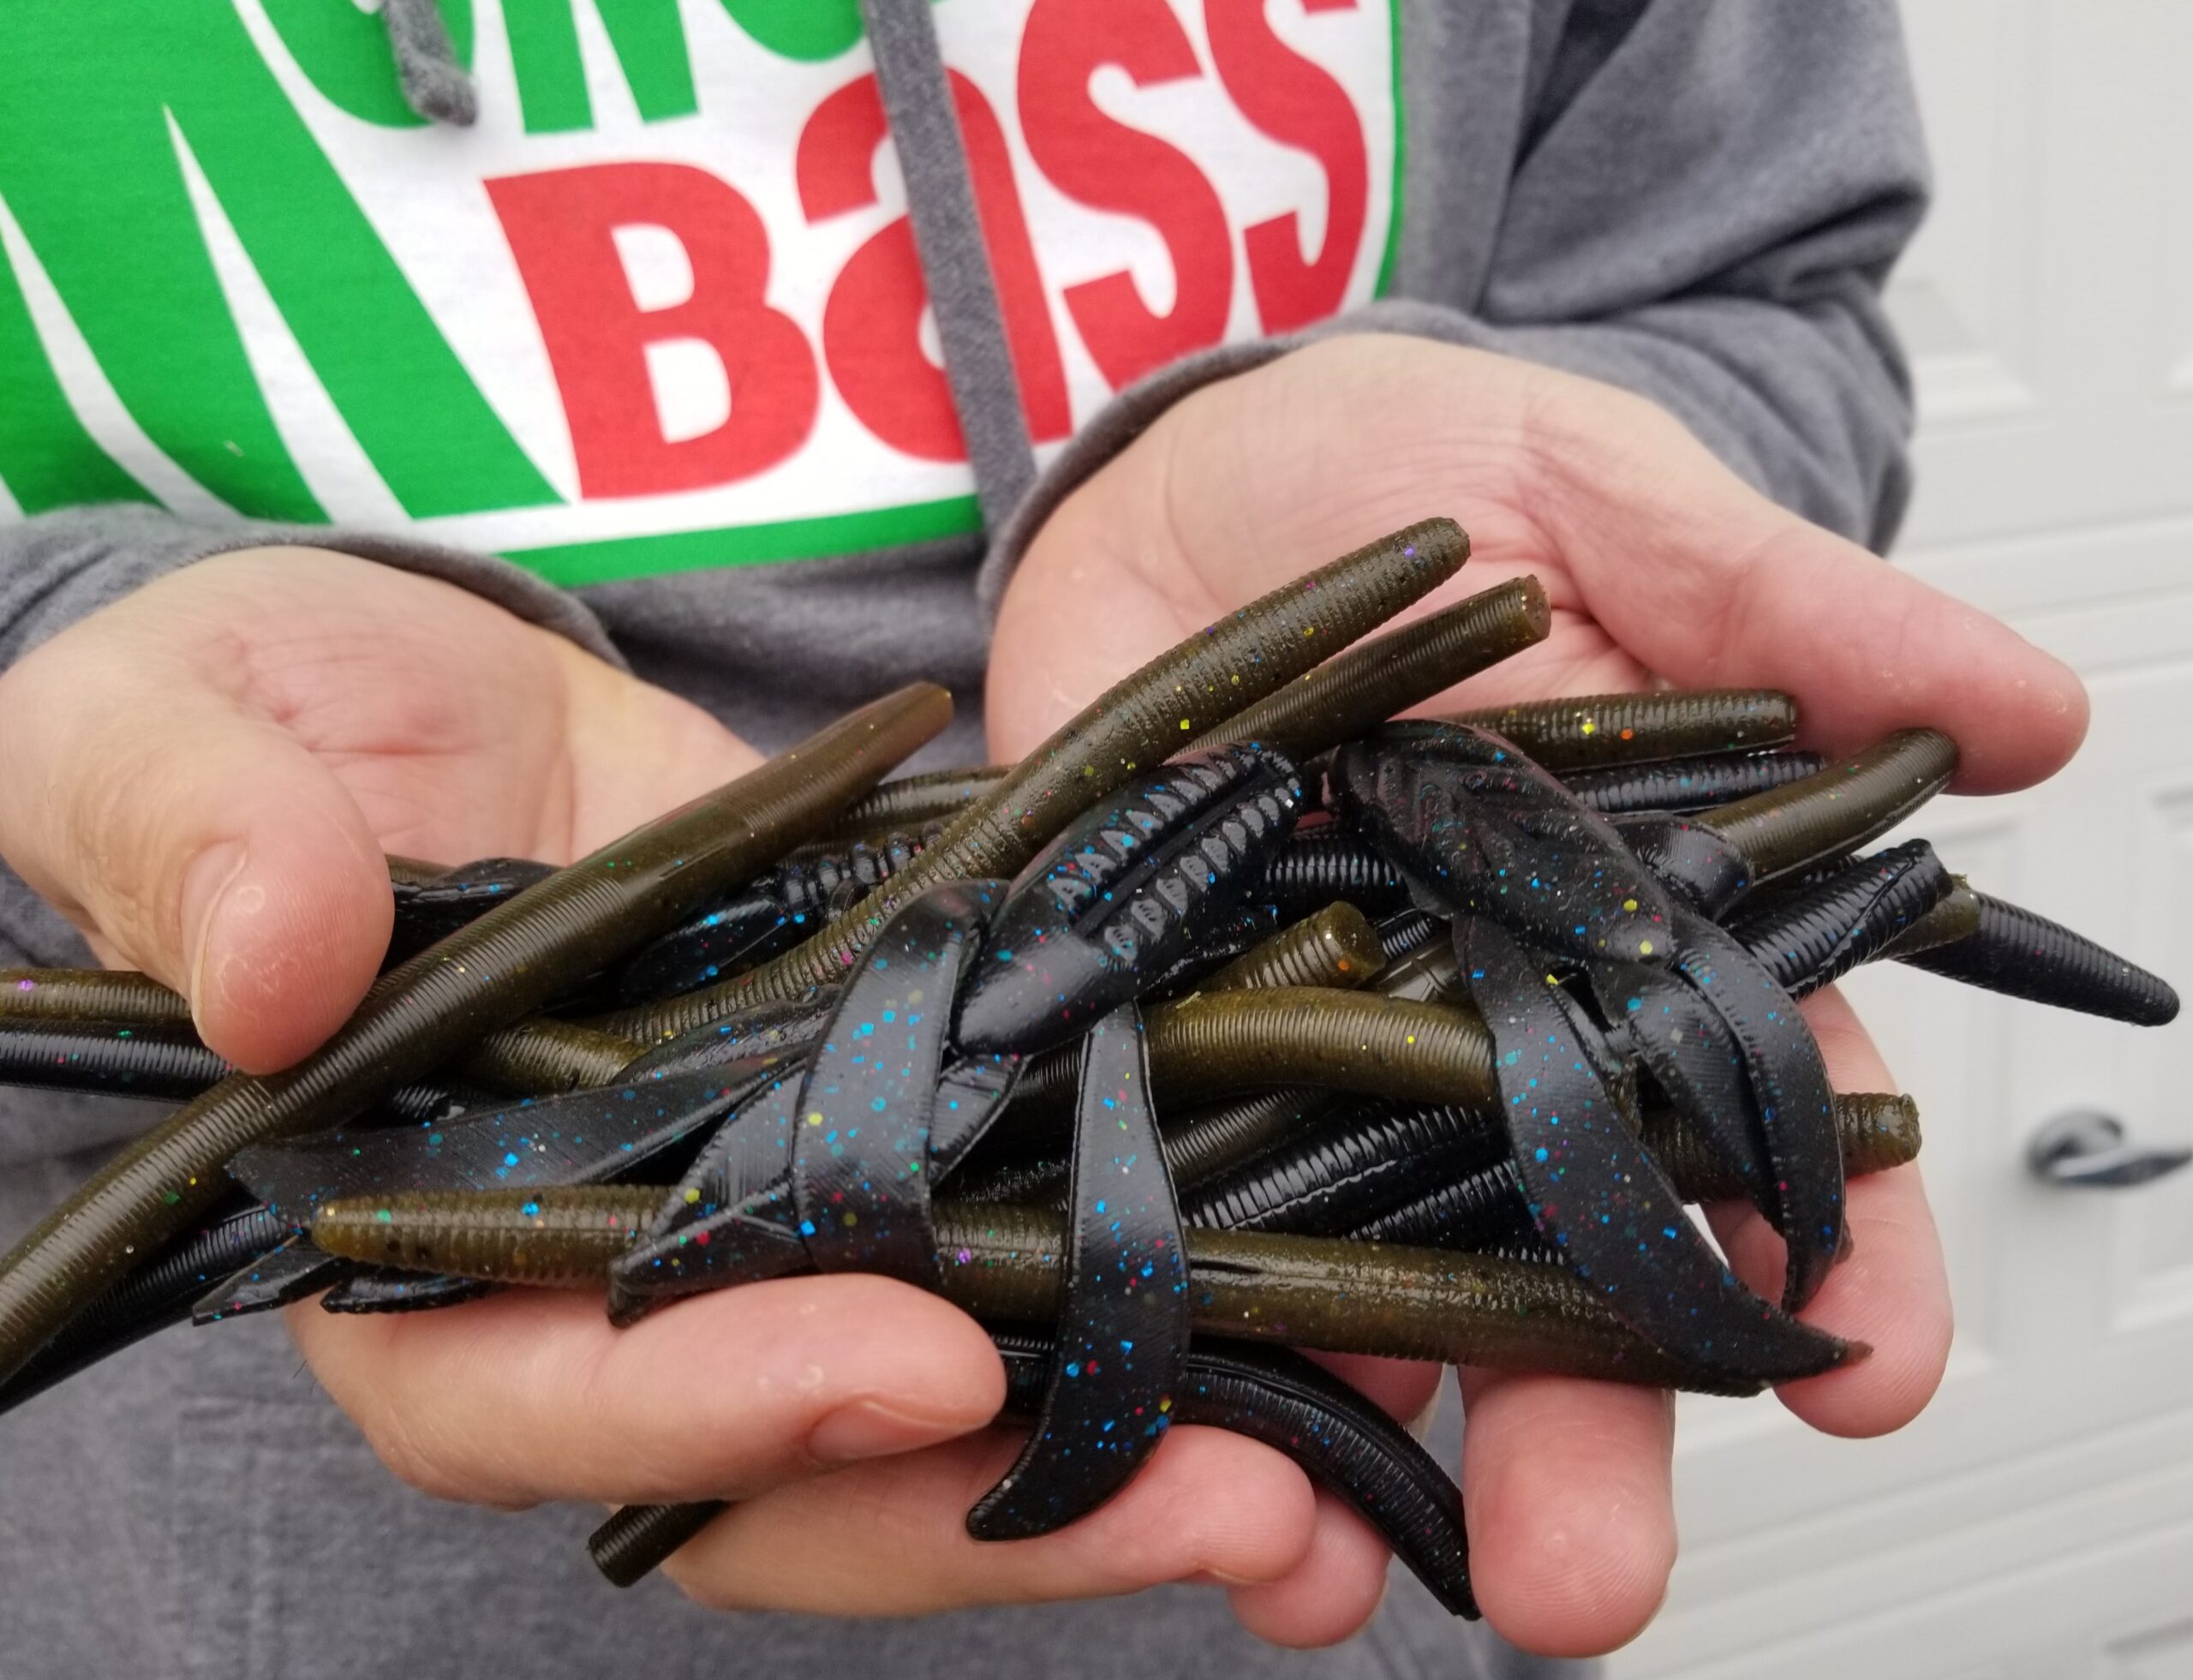 How to recycle used BAITS to make soft plastics